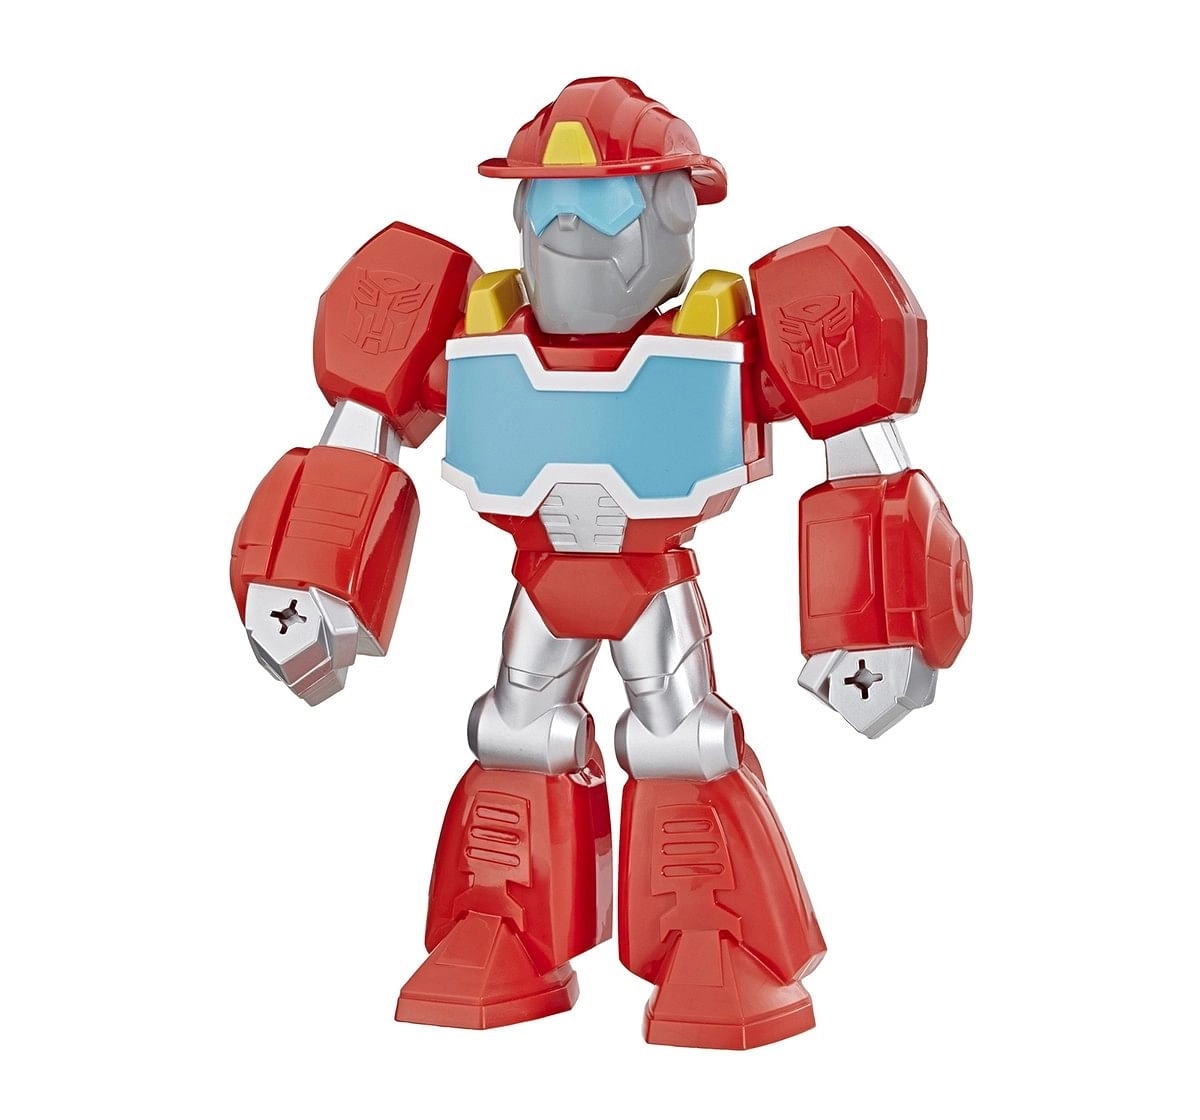 Playskool Heroes Transformers Rescue Bots Academy Mega Mighties Heatwave The Fire-Bot Activity Toys for Kids age 3Y+ 